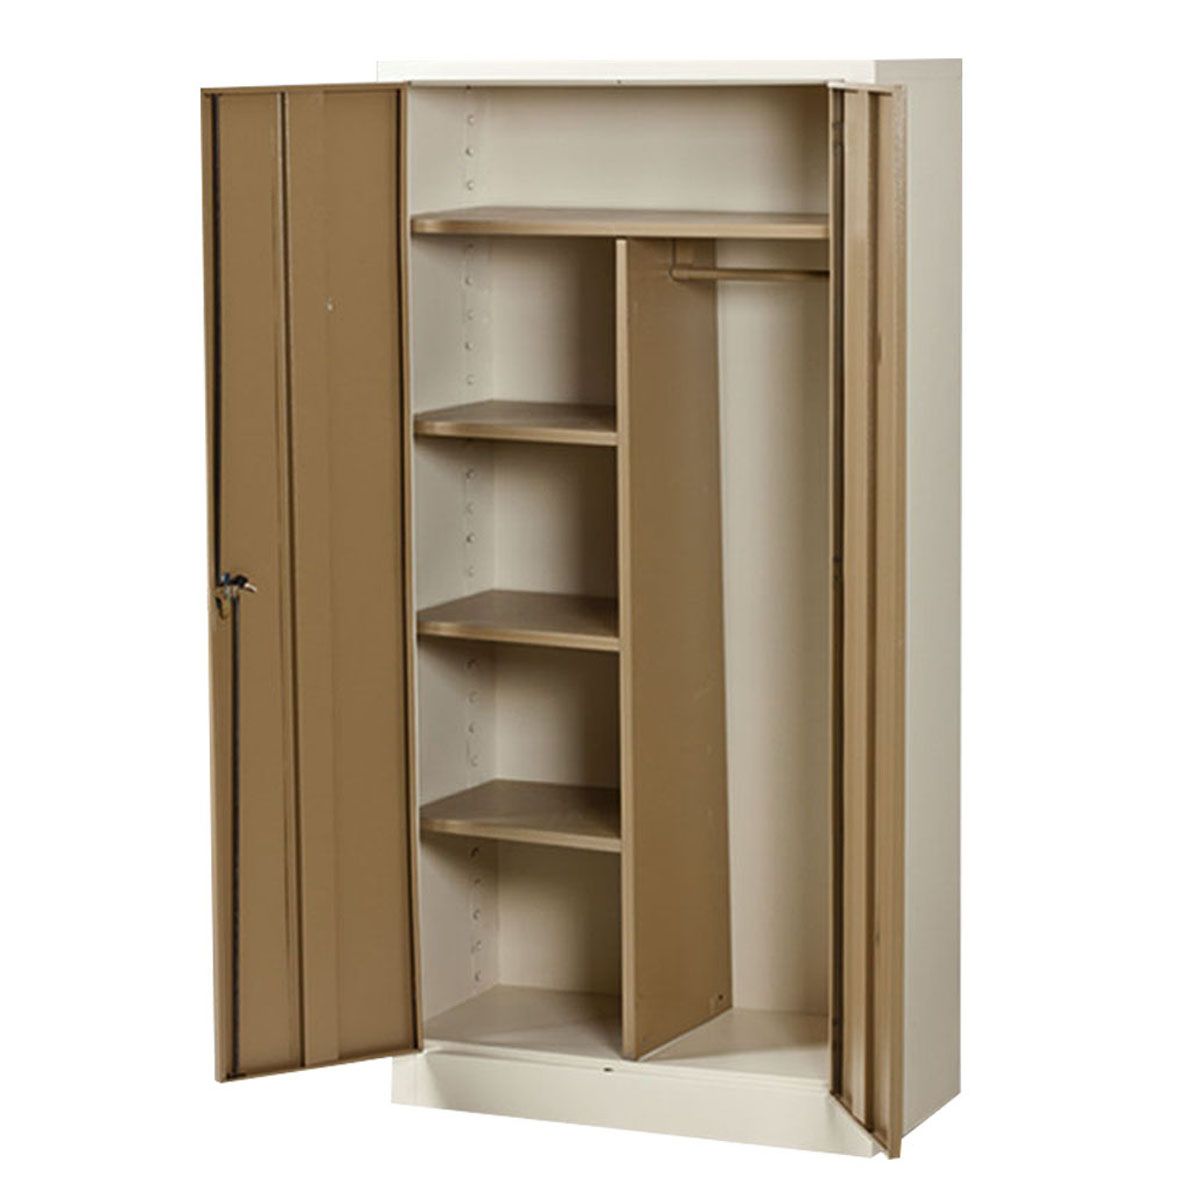 Heavy Duty Steel Gents Wardrobe. Shop Online And Save. Within Heavy Duty Wardrobes (Gallery 1 of 20)